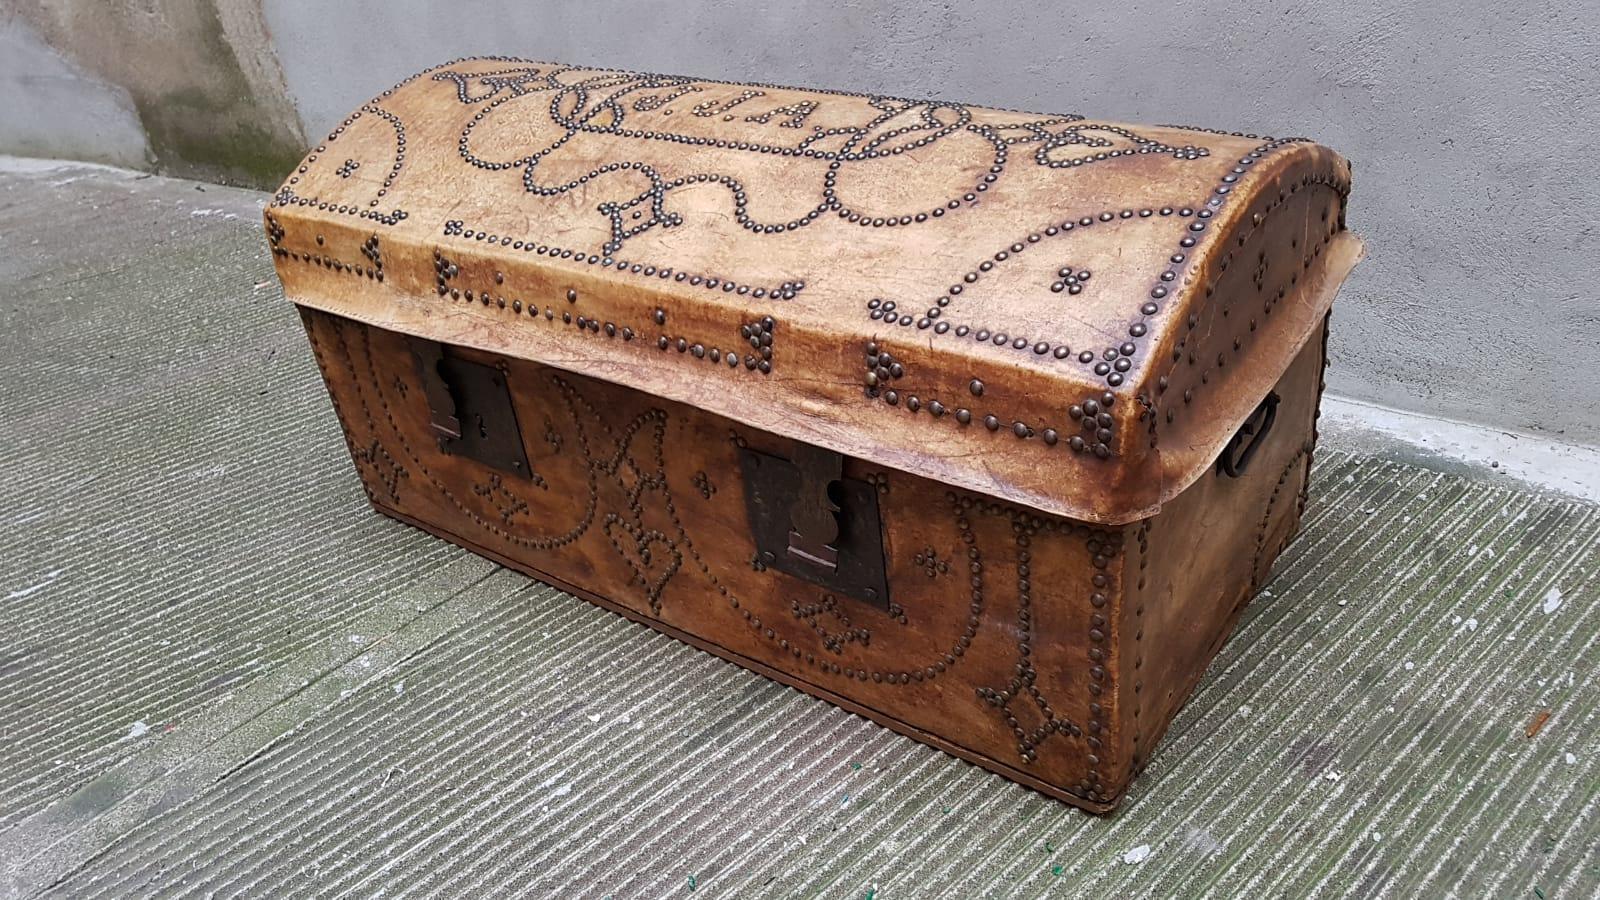 Beginning 20th Century Leather Portoguese Trunk for Travel, 1930 For Sale 3